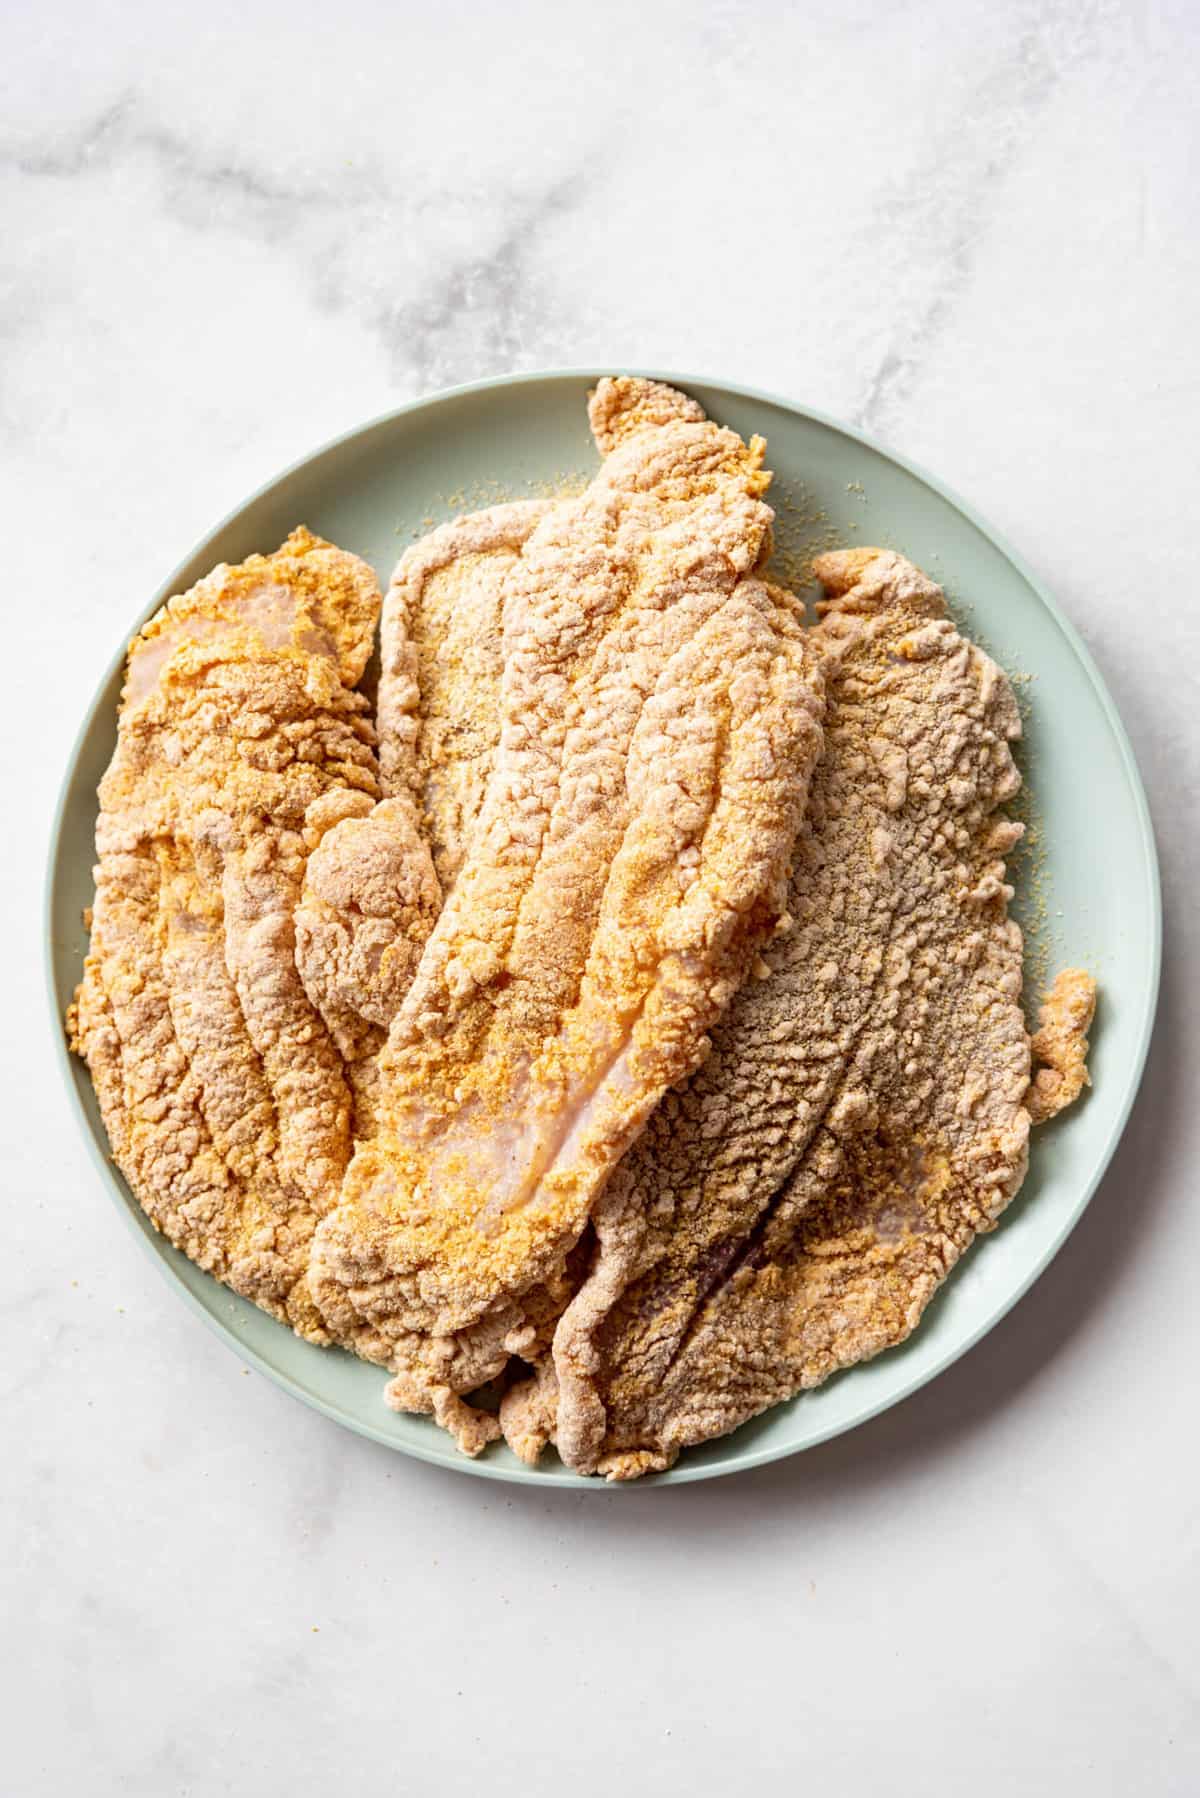 Catfish filets that have been coated in a spiced cornmeal breading on a plate.